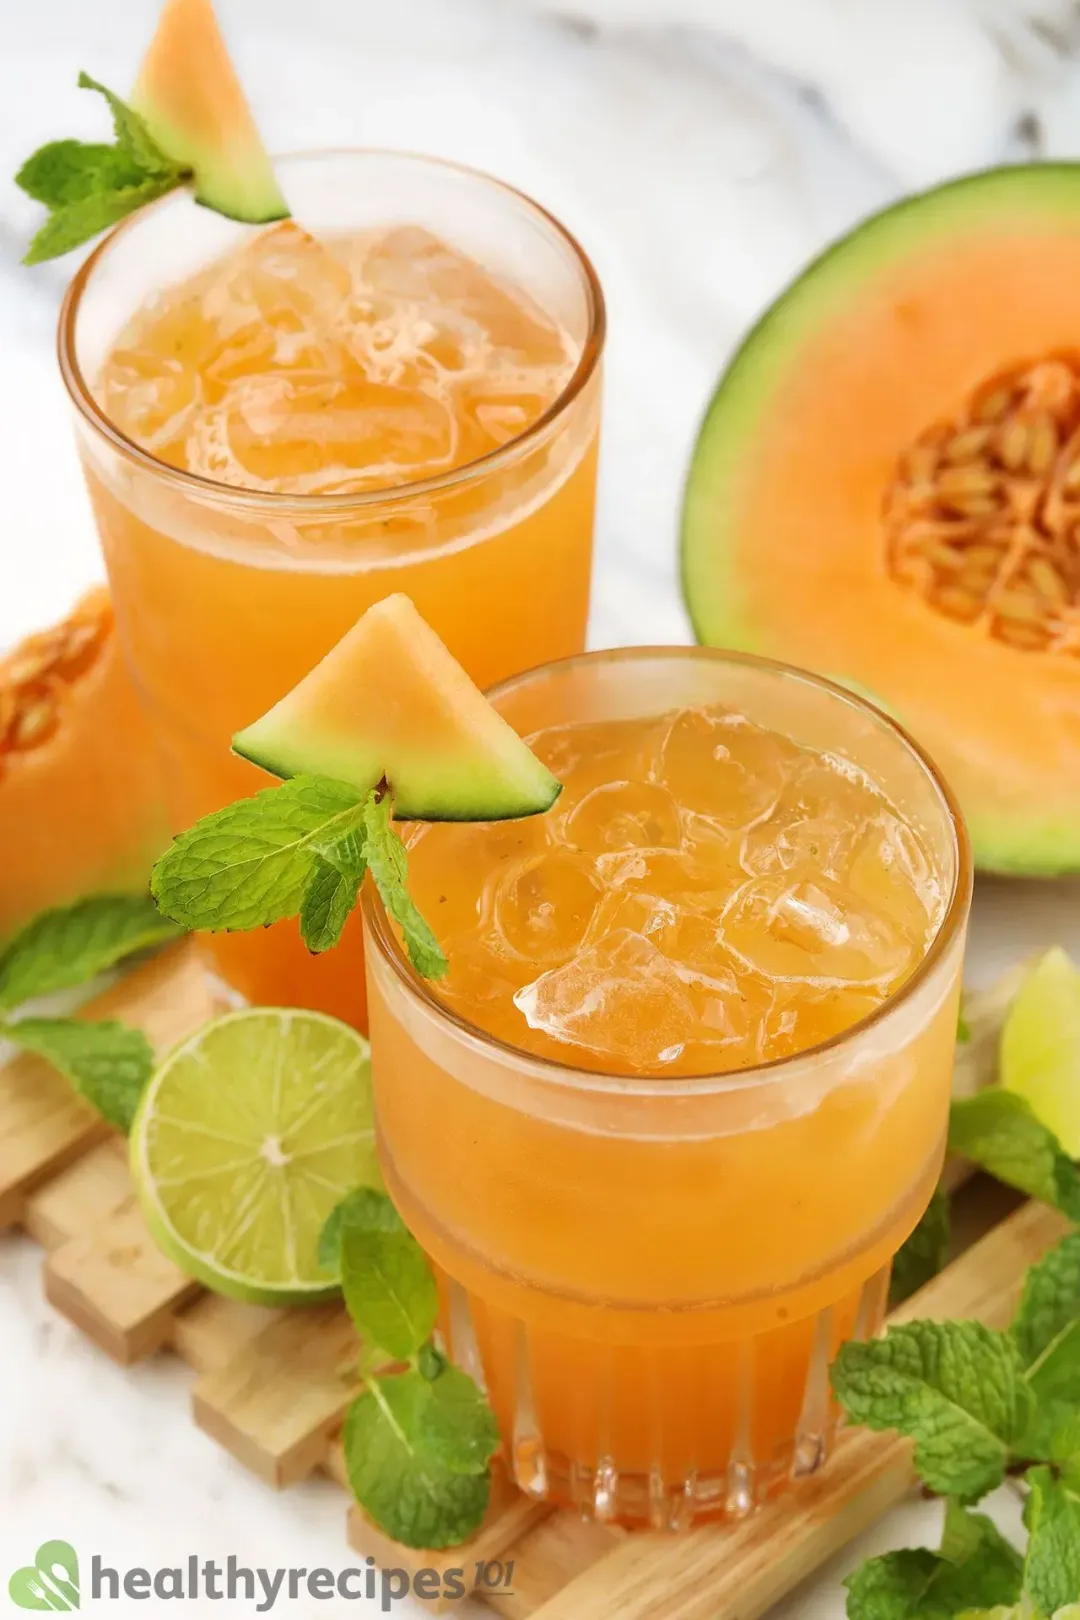 Two iced glasses of cantaloupe drinks, garnished with mints, cantaloupe wedges, and half of a lime